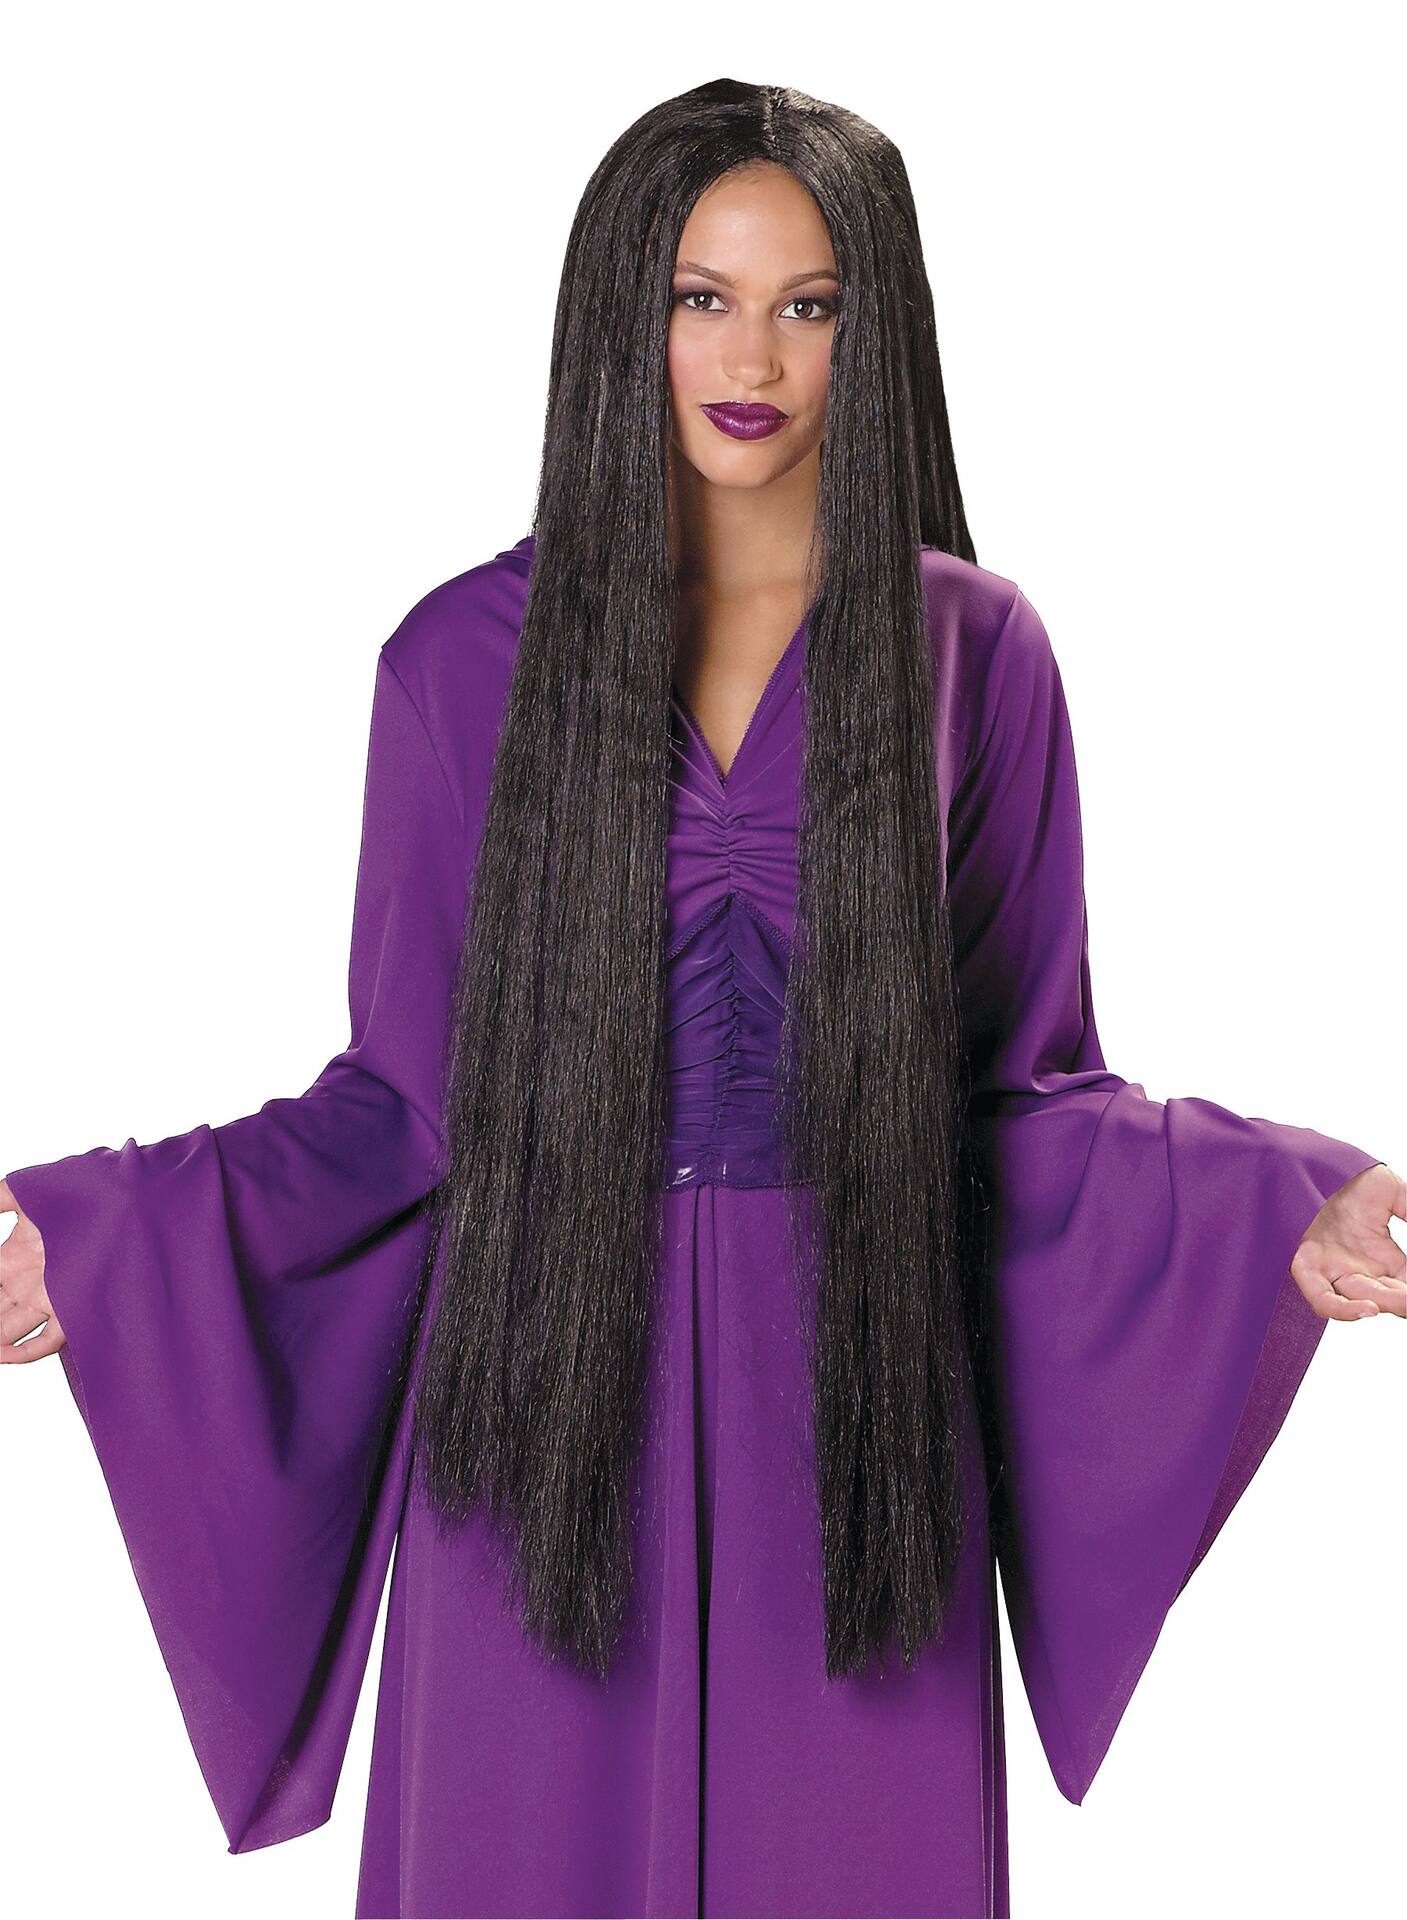 Long Straight Hair Wig, Black, One Size, Wearable Costume Accessory for  Halloween